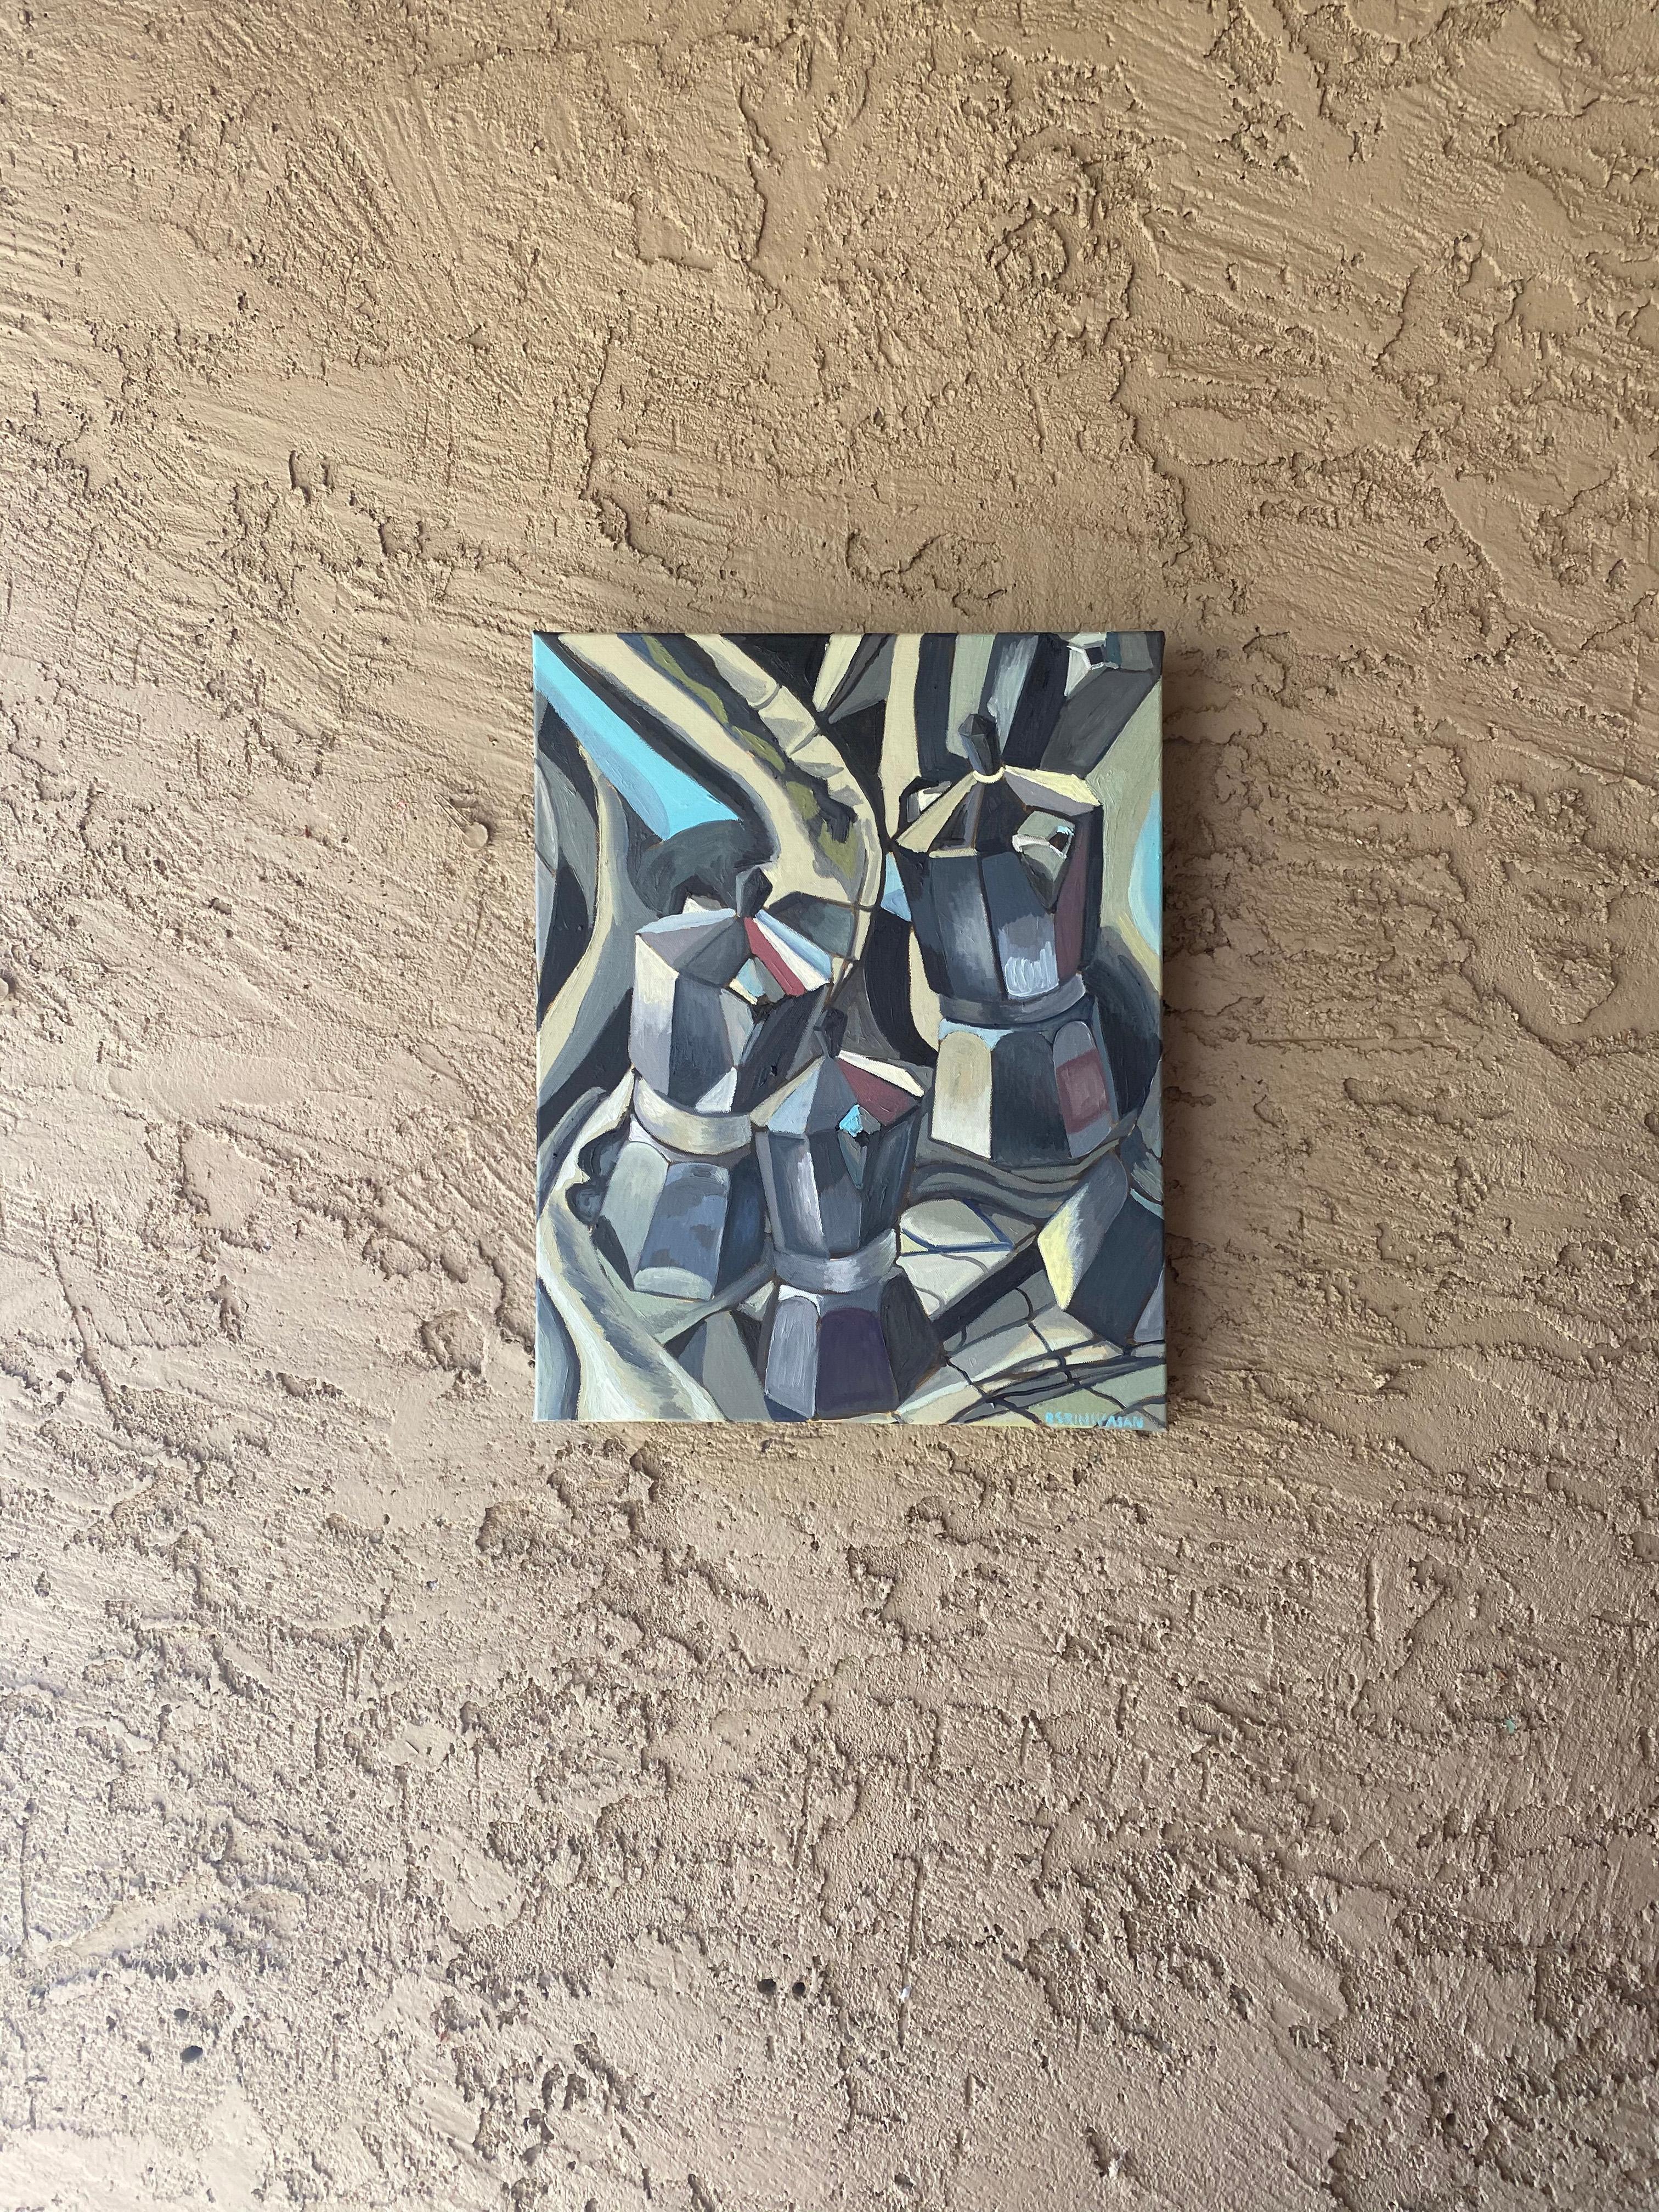 cubism coffee painting